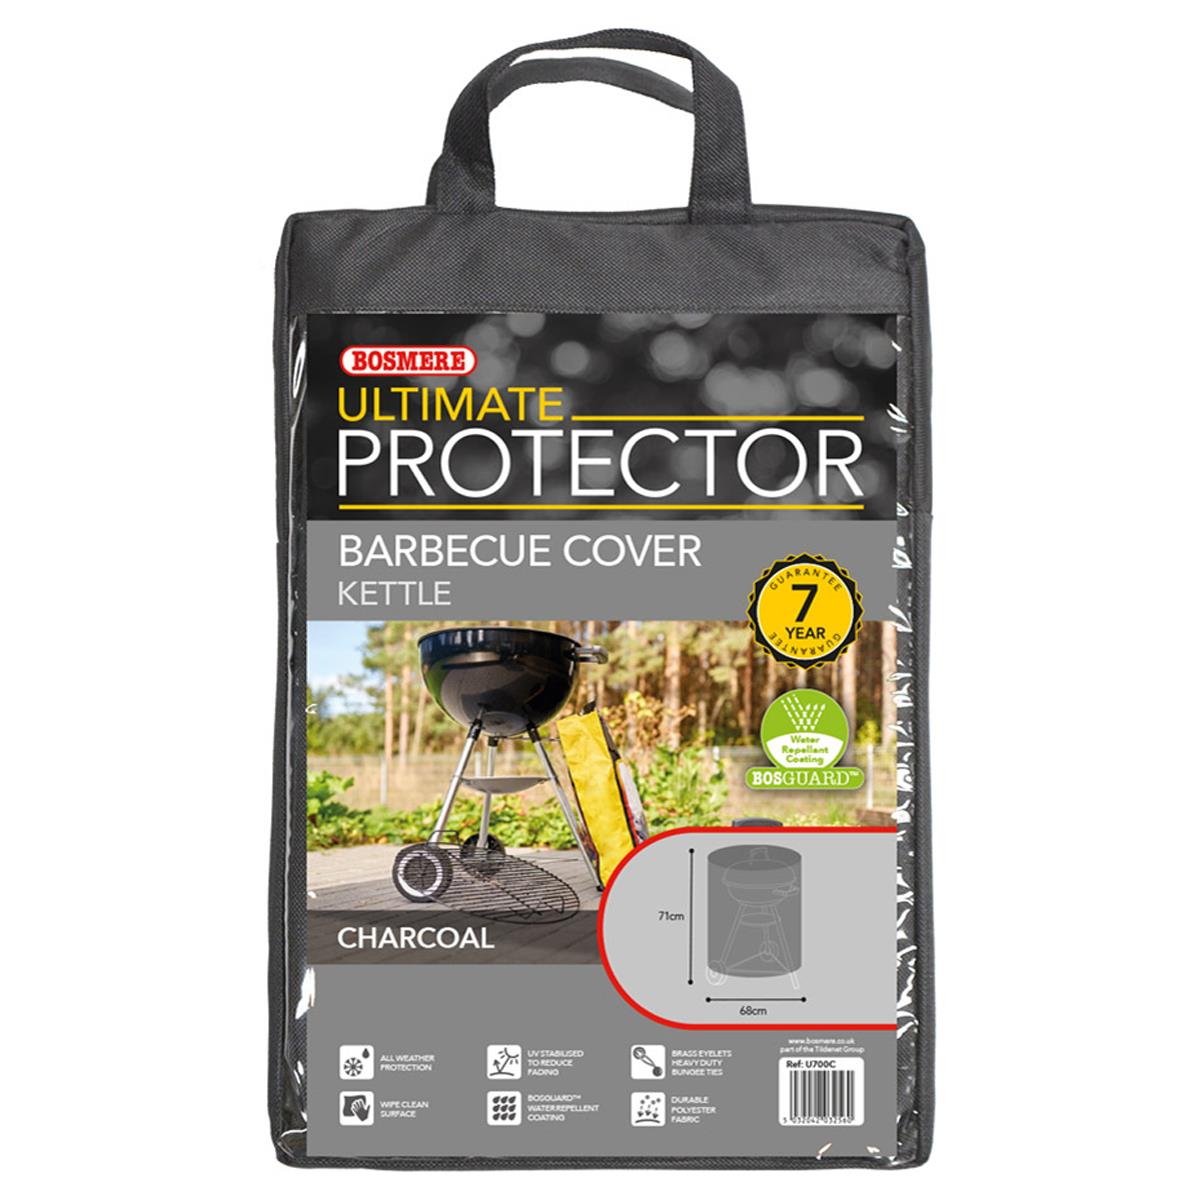 Bosmere Ultimate Protector Kettle Barbecue Cover Questions & Answers